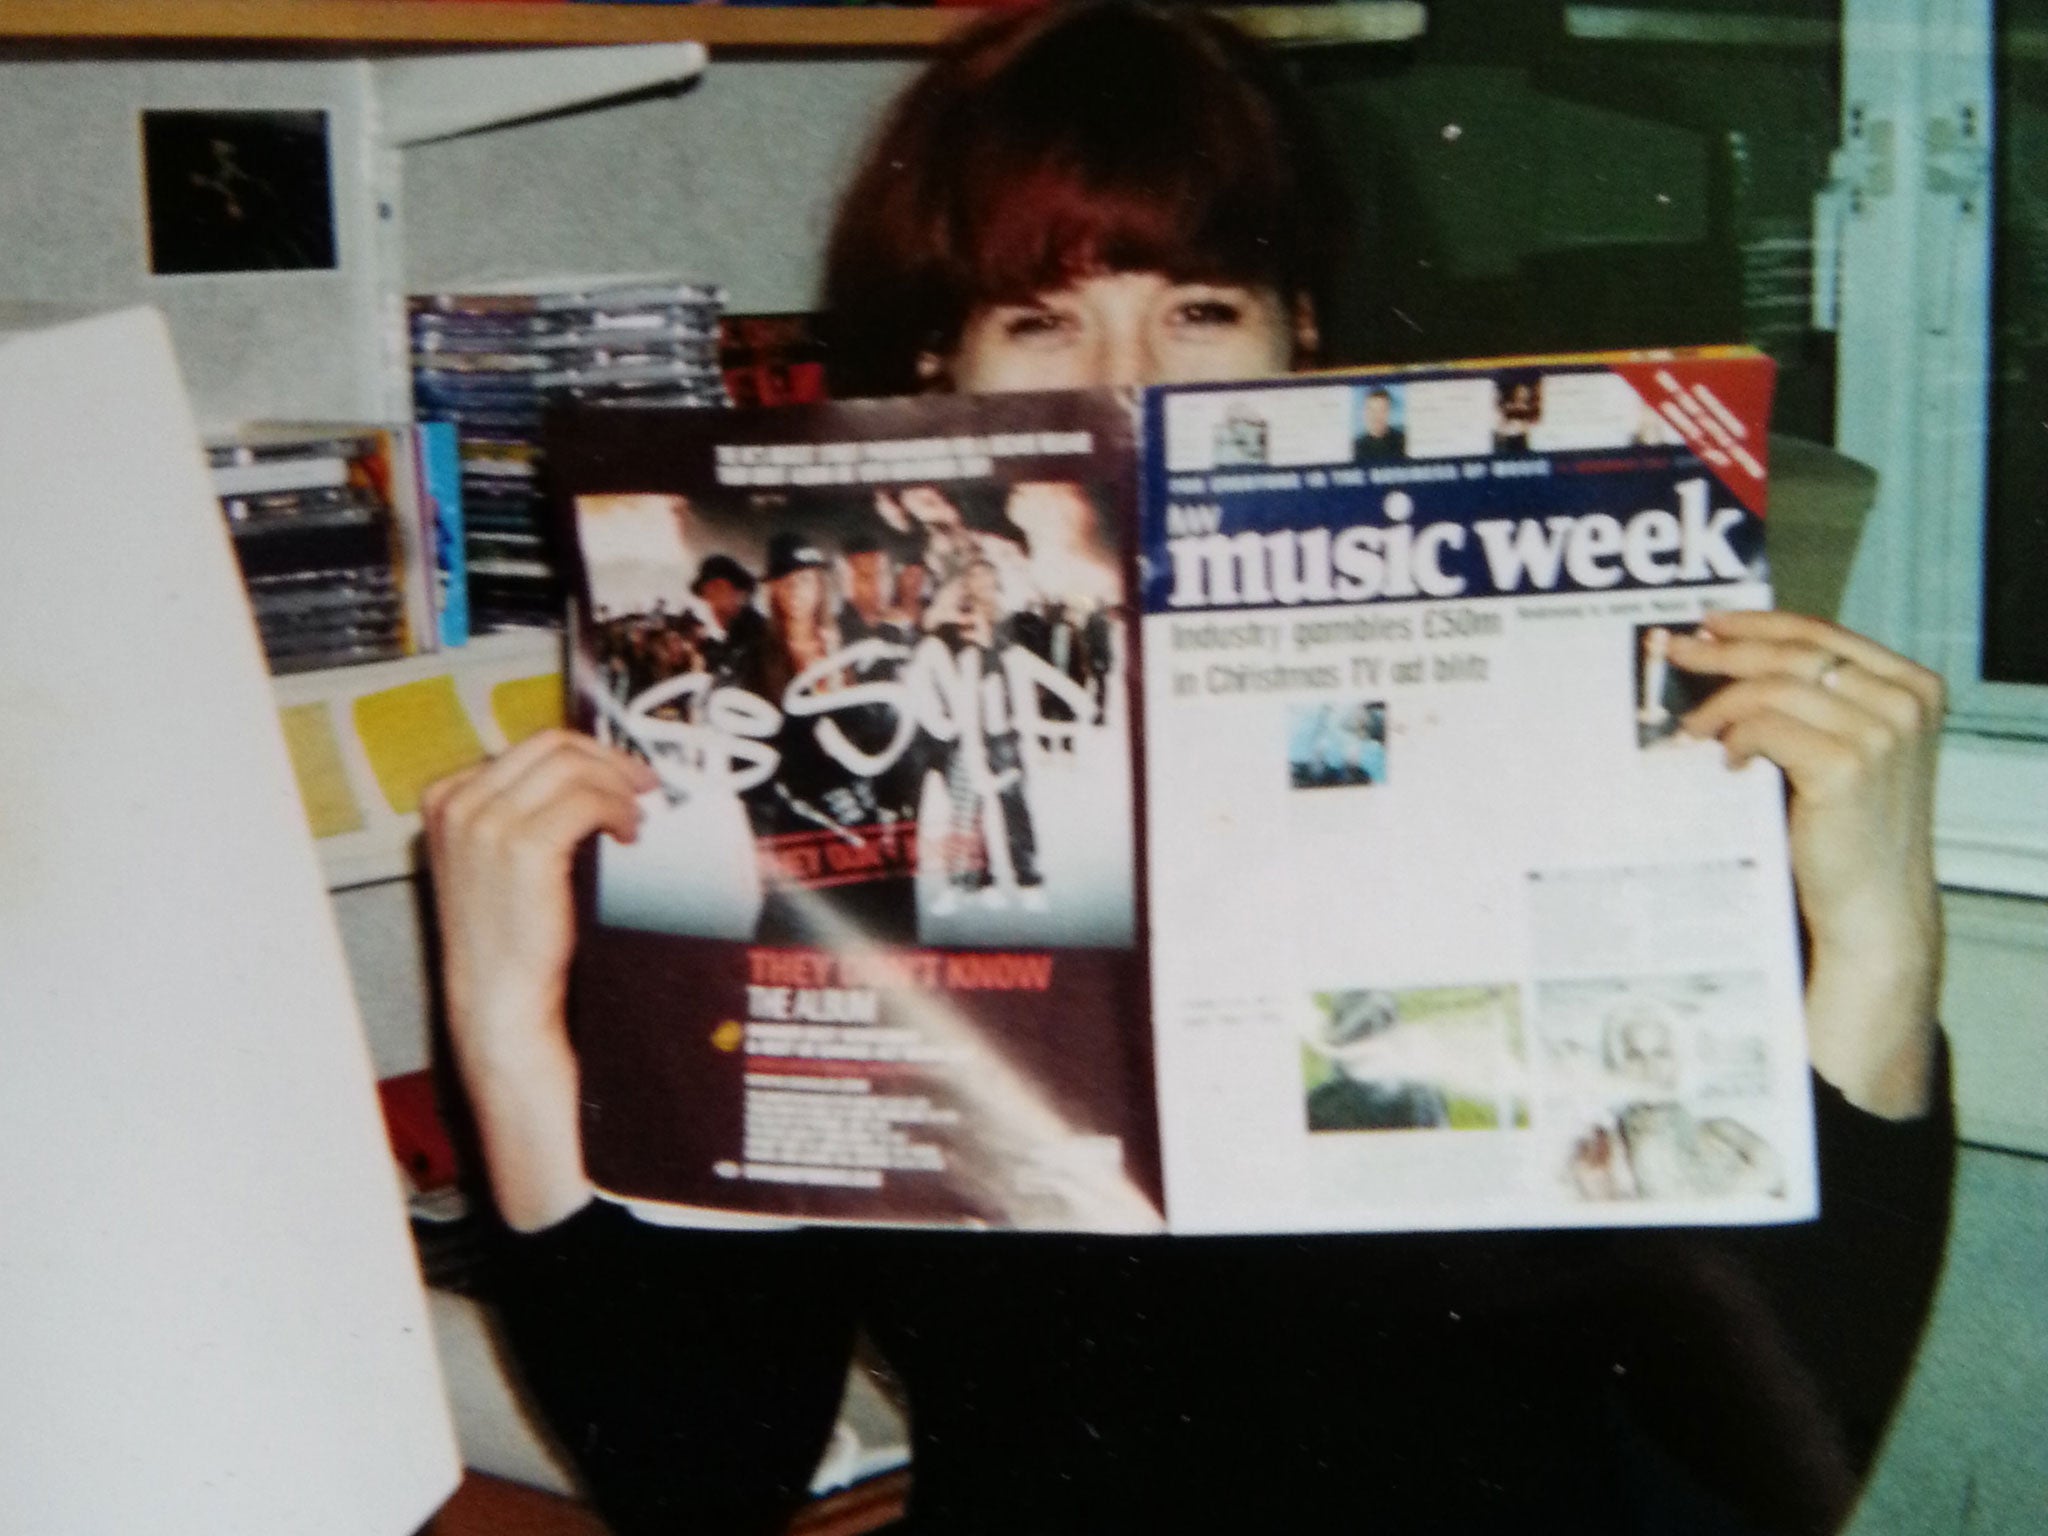 The author ‘absorbing’ a copy of Music Week magazine